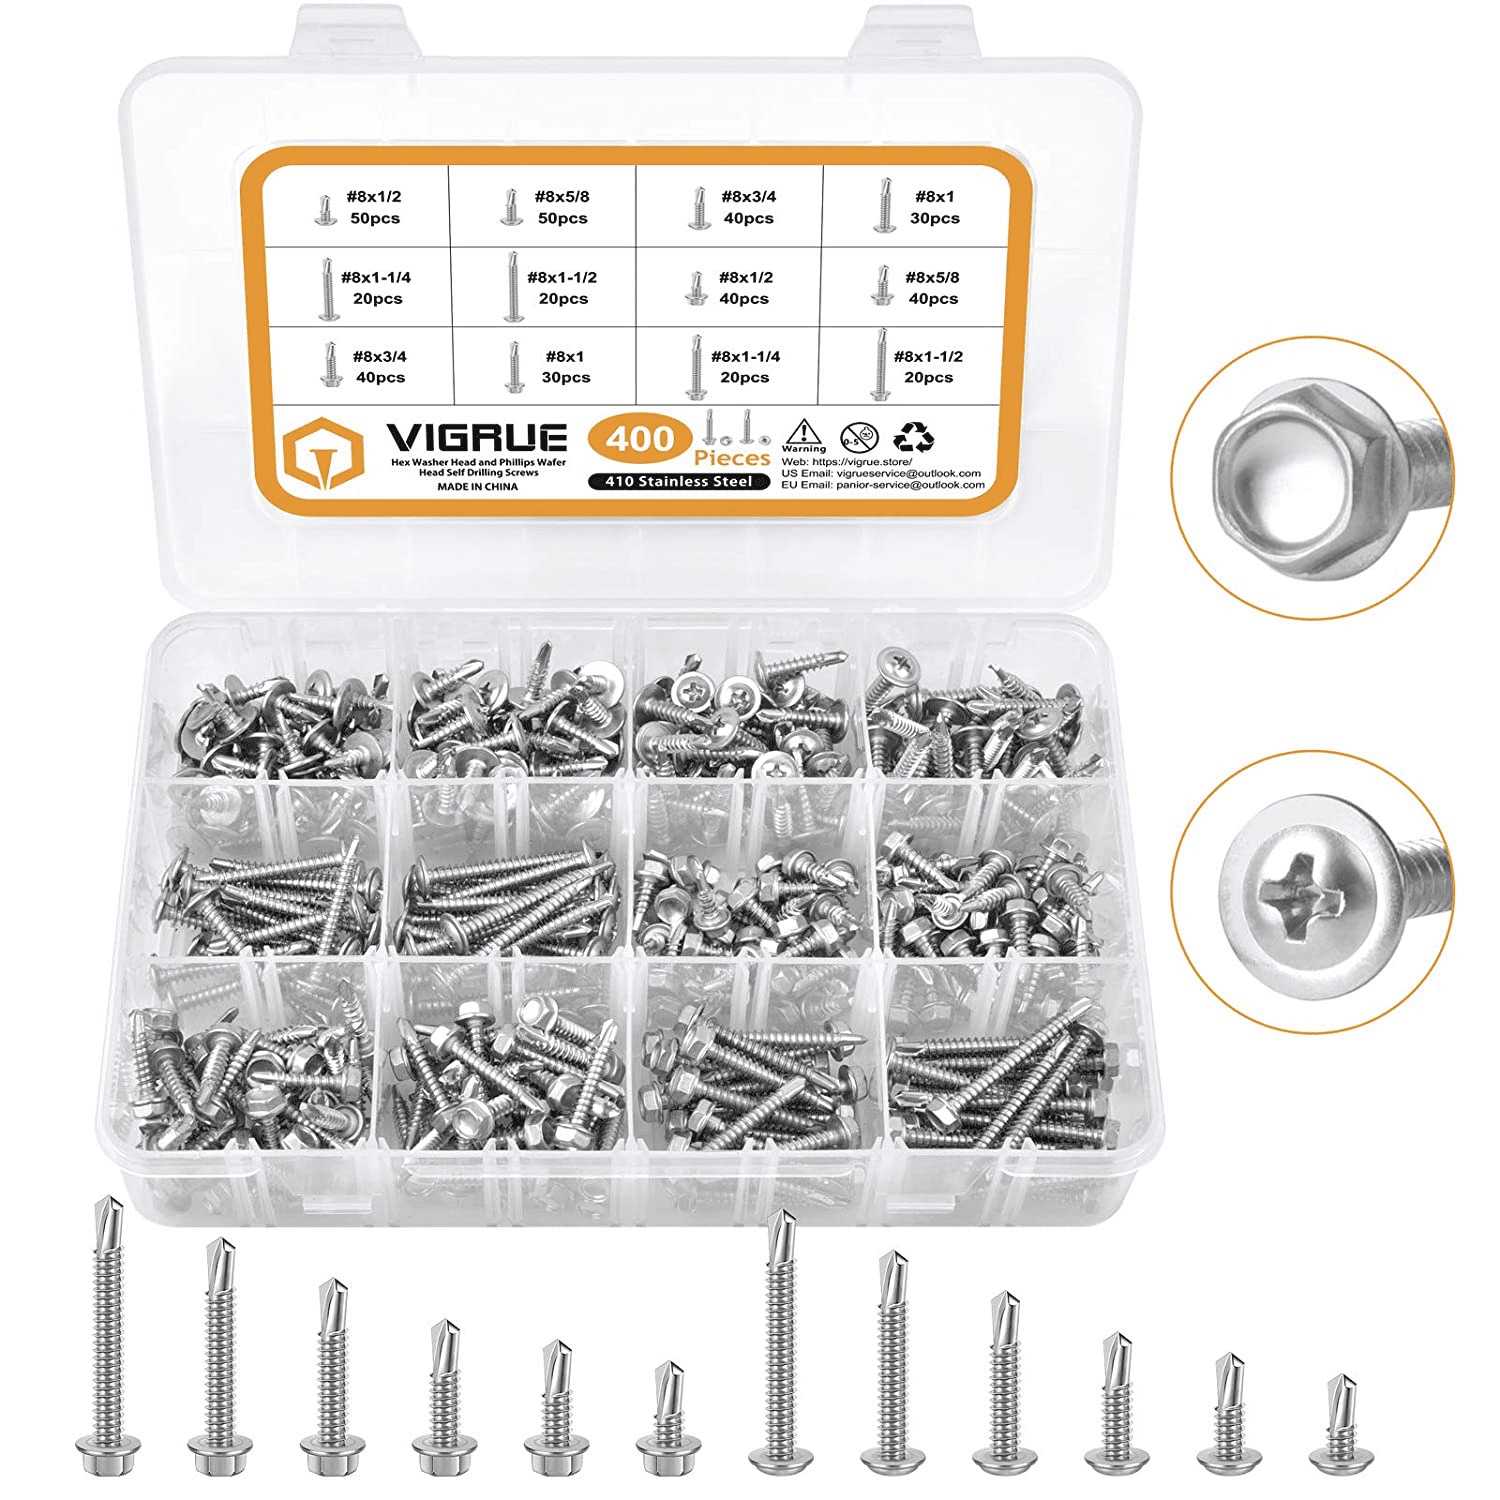 400pcs Assorted M2 Flat Head Stainless Steel Self Tapping Screws Assortment Kit 